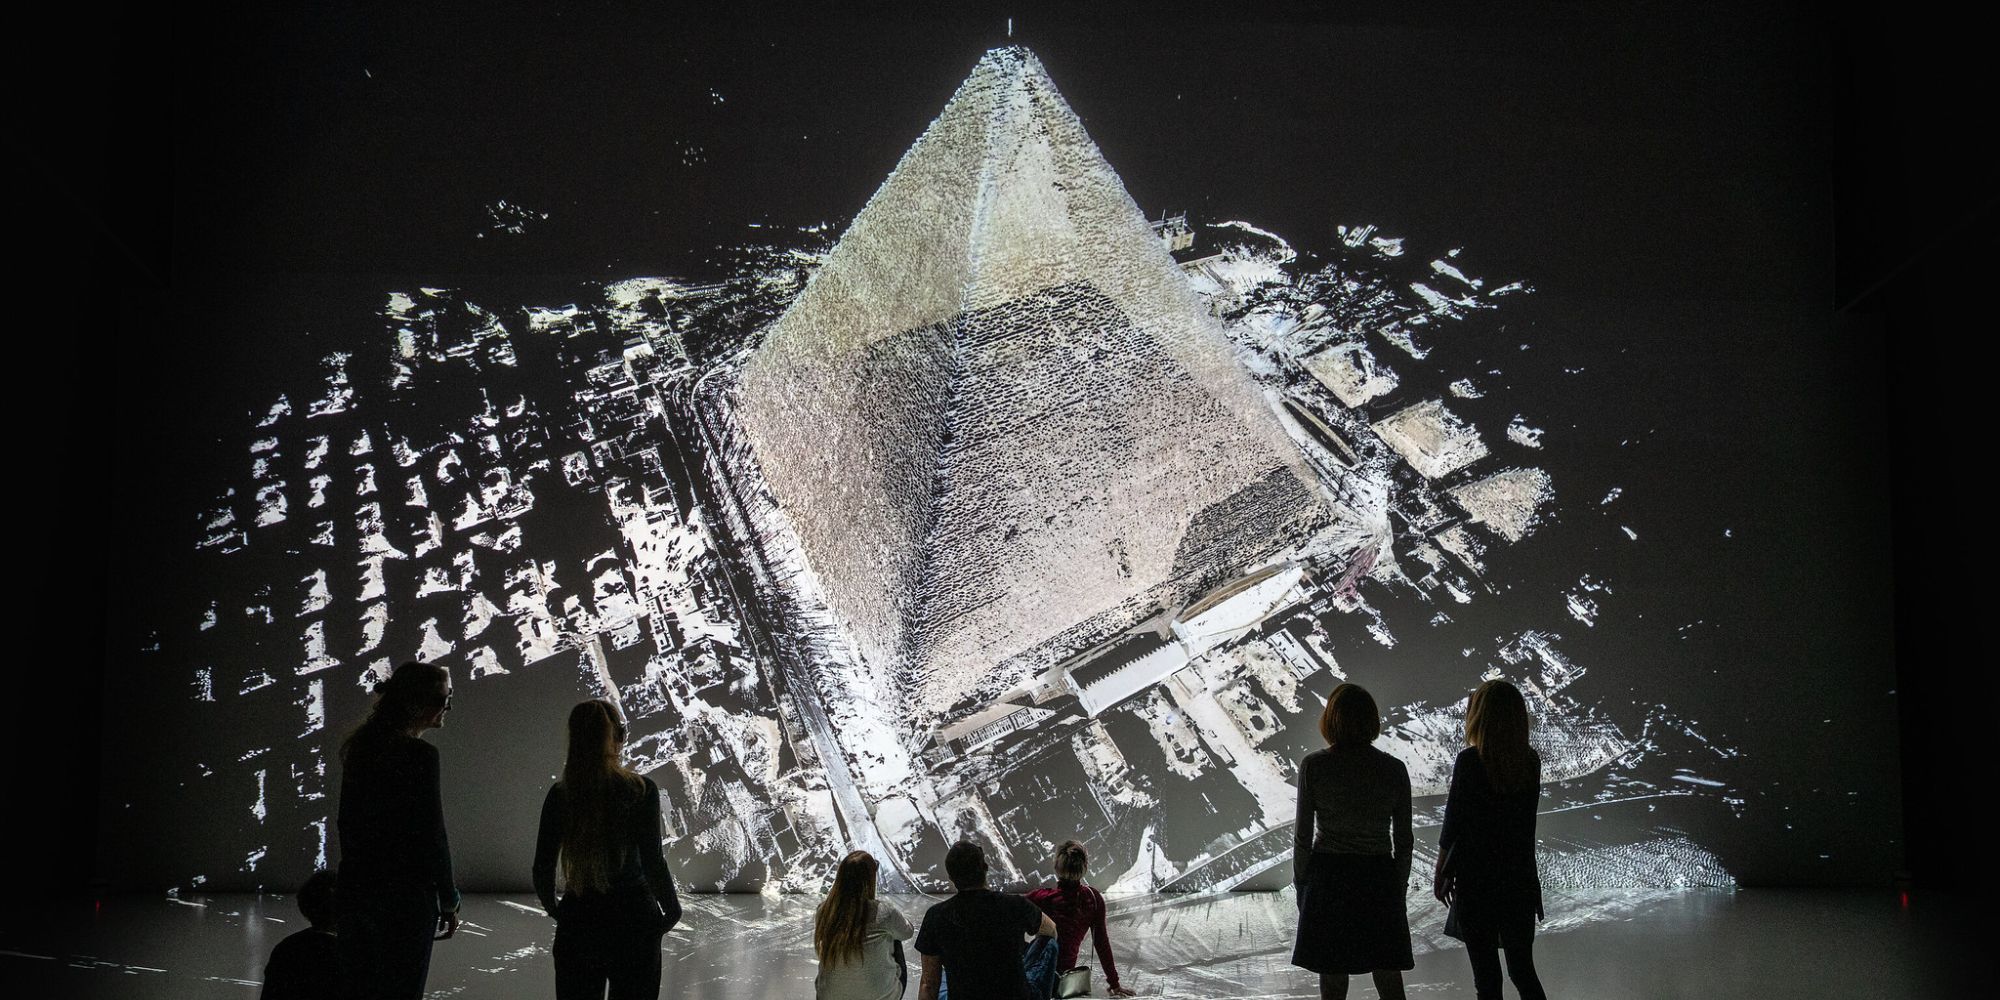 The Great Pyramid in 3D